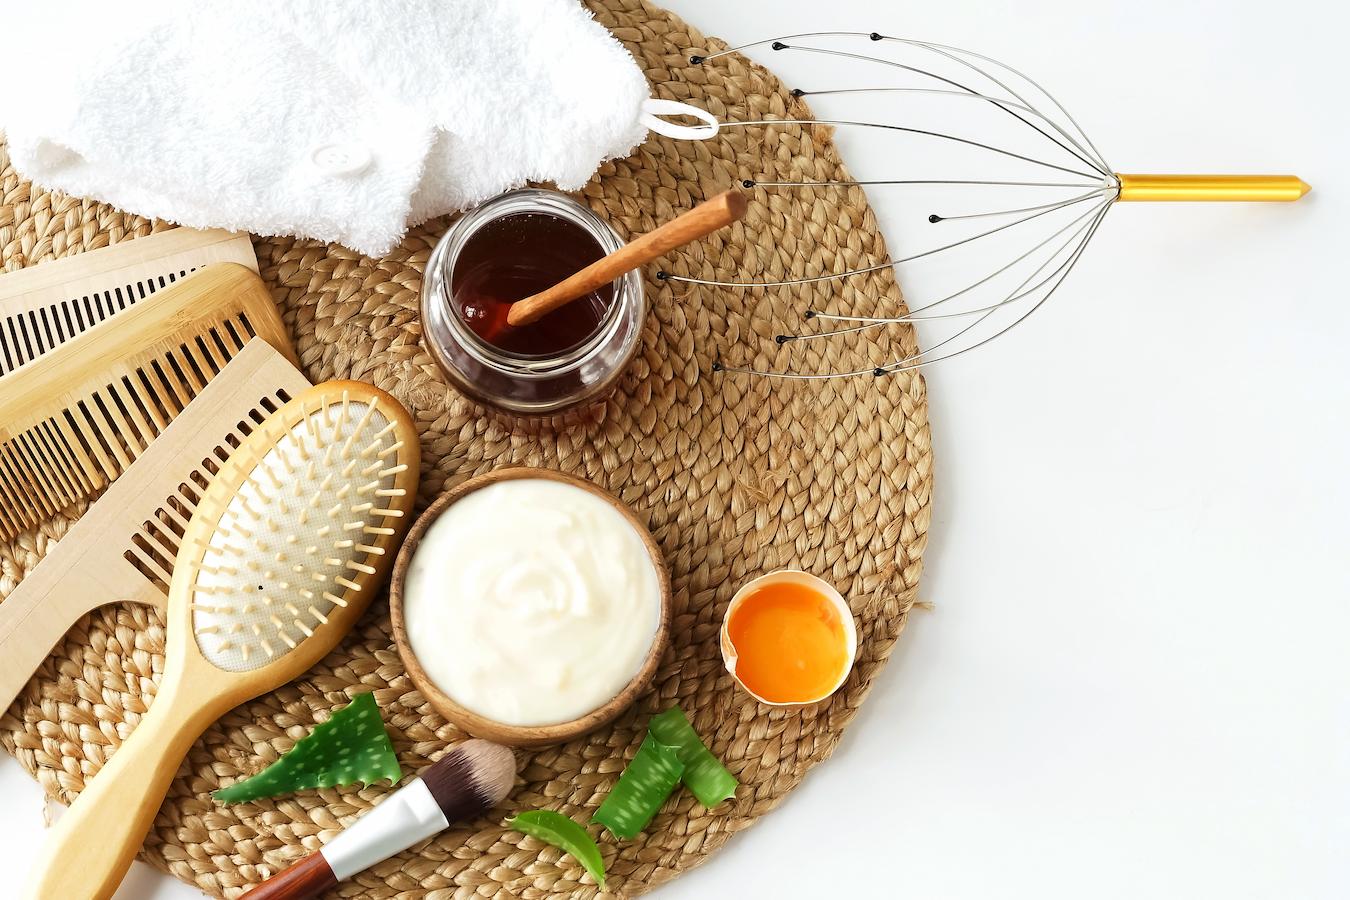 A hair mask can include essential oils as well as jojoba oil